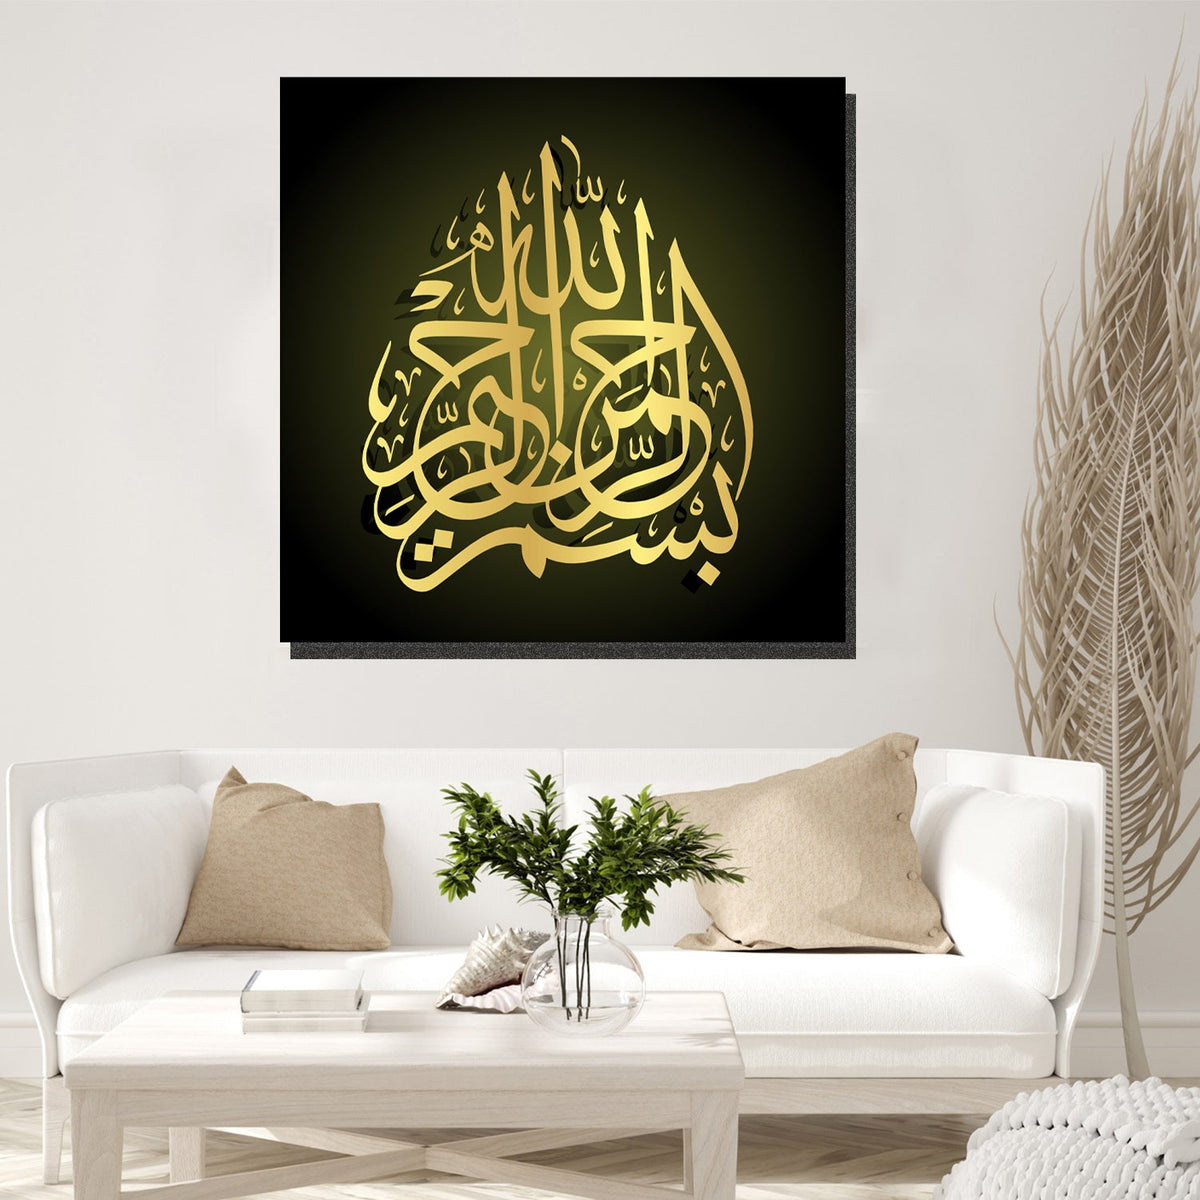 https://cdn.shopify.com/s/files/1/0387/9986/8044/products/IslamicArtLimitedEdition15CanvasArtprintStretched-2.jpg